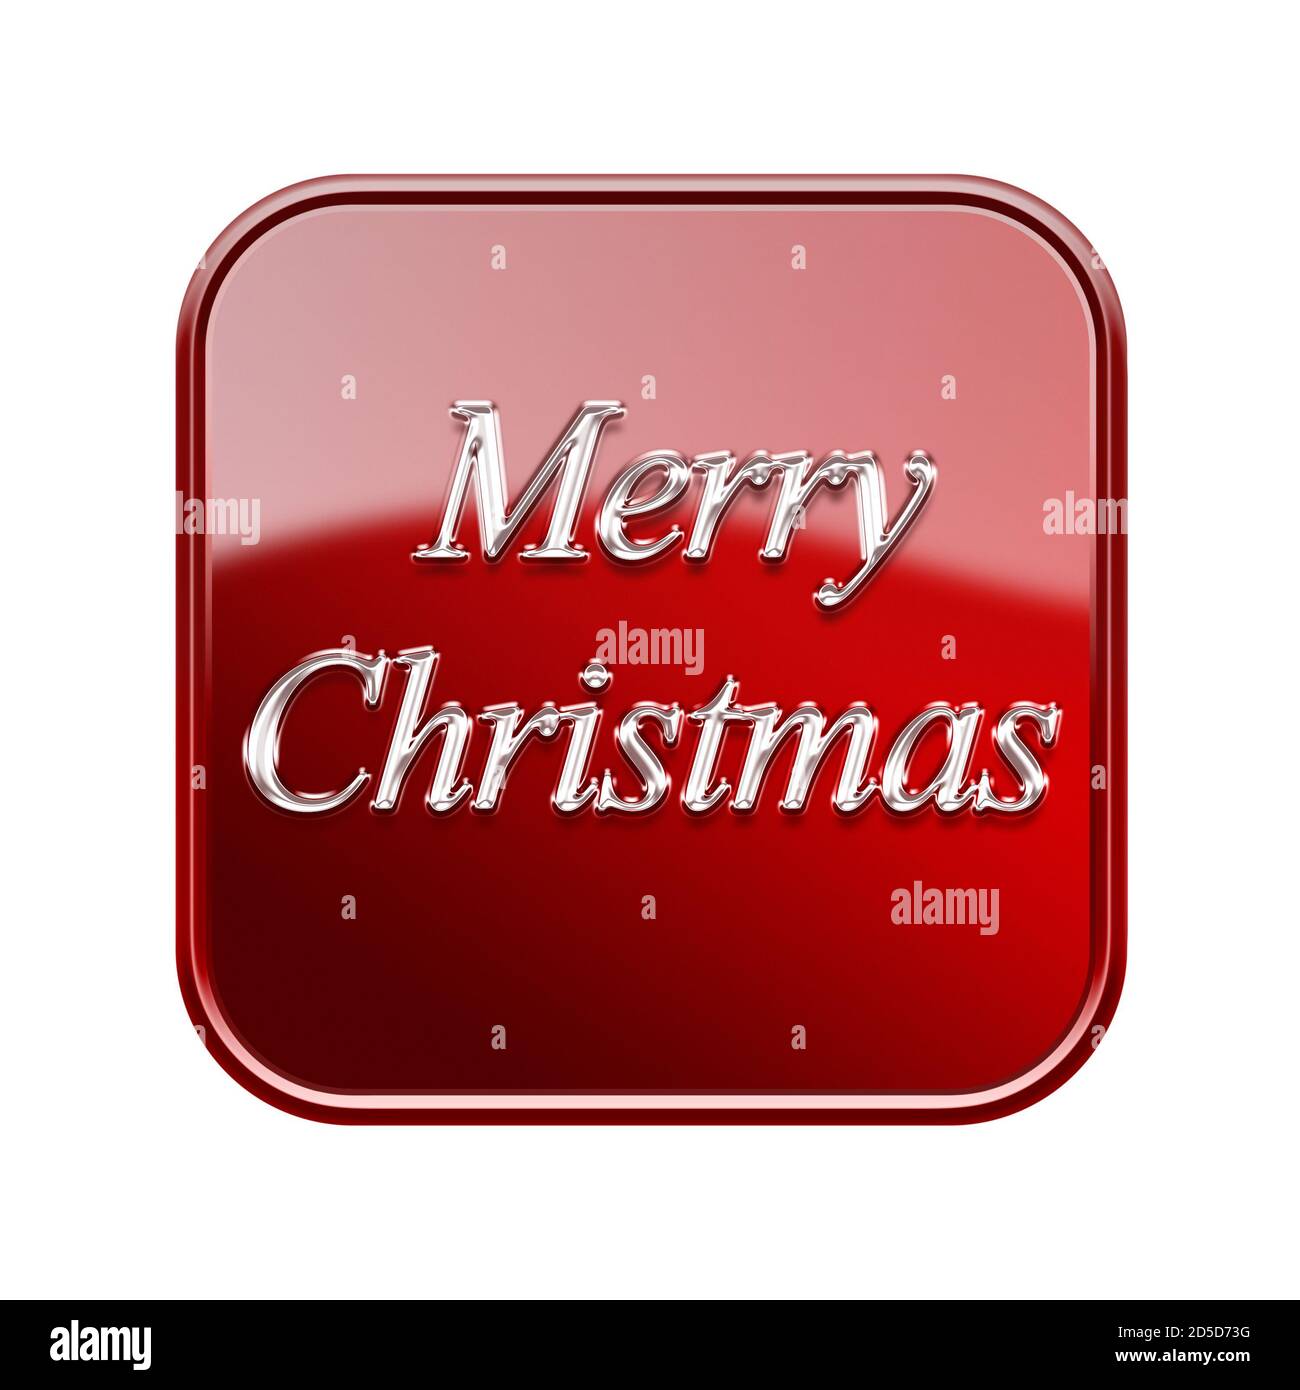 Merry Christmas icon glossy red, isolated on white background Stock Photo